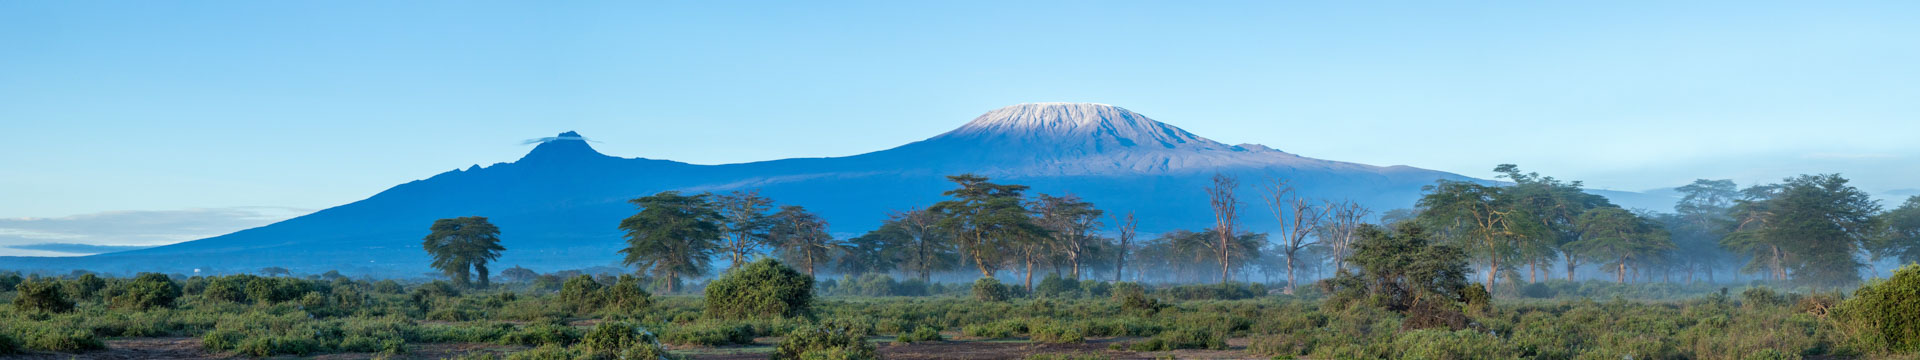 Early mornings are made much easier thanks to this view of Kili in all her glory